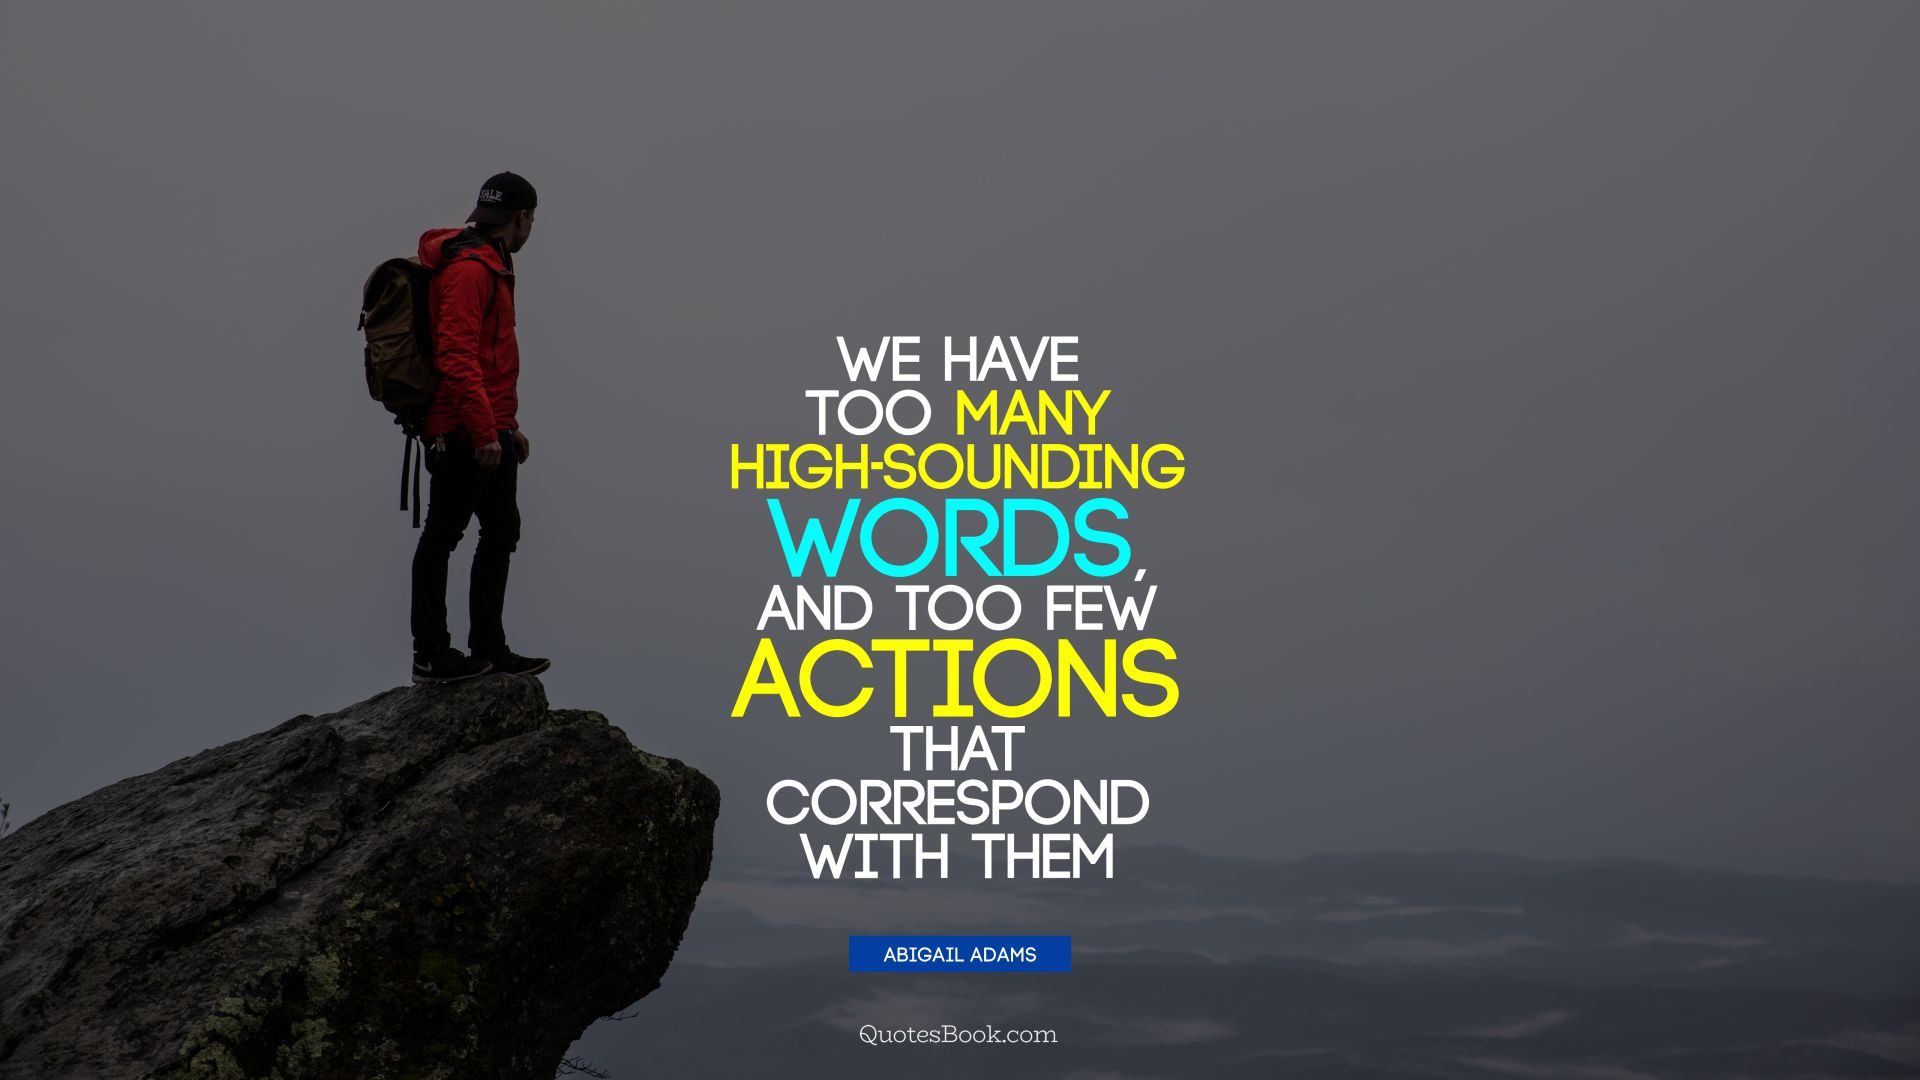 We have too many high-sounding words, and too few actions that correspond with them. - Quote by Abigail Adams